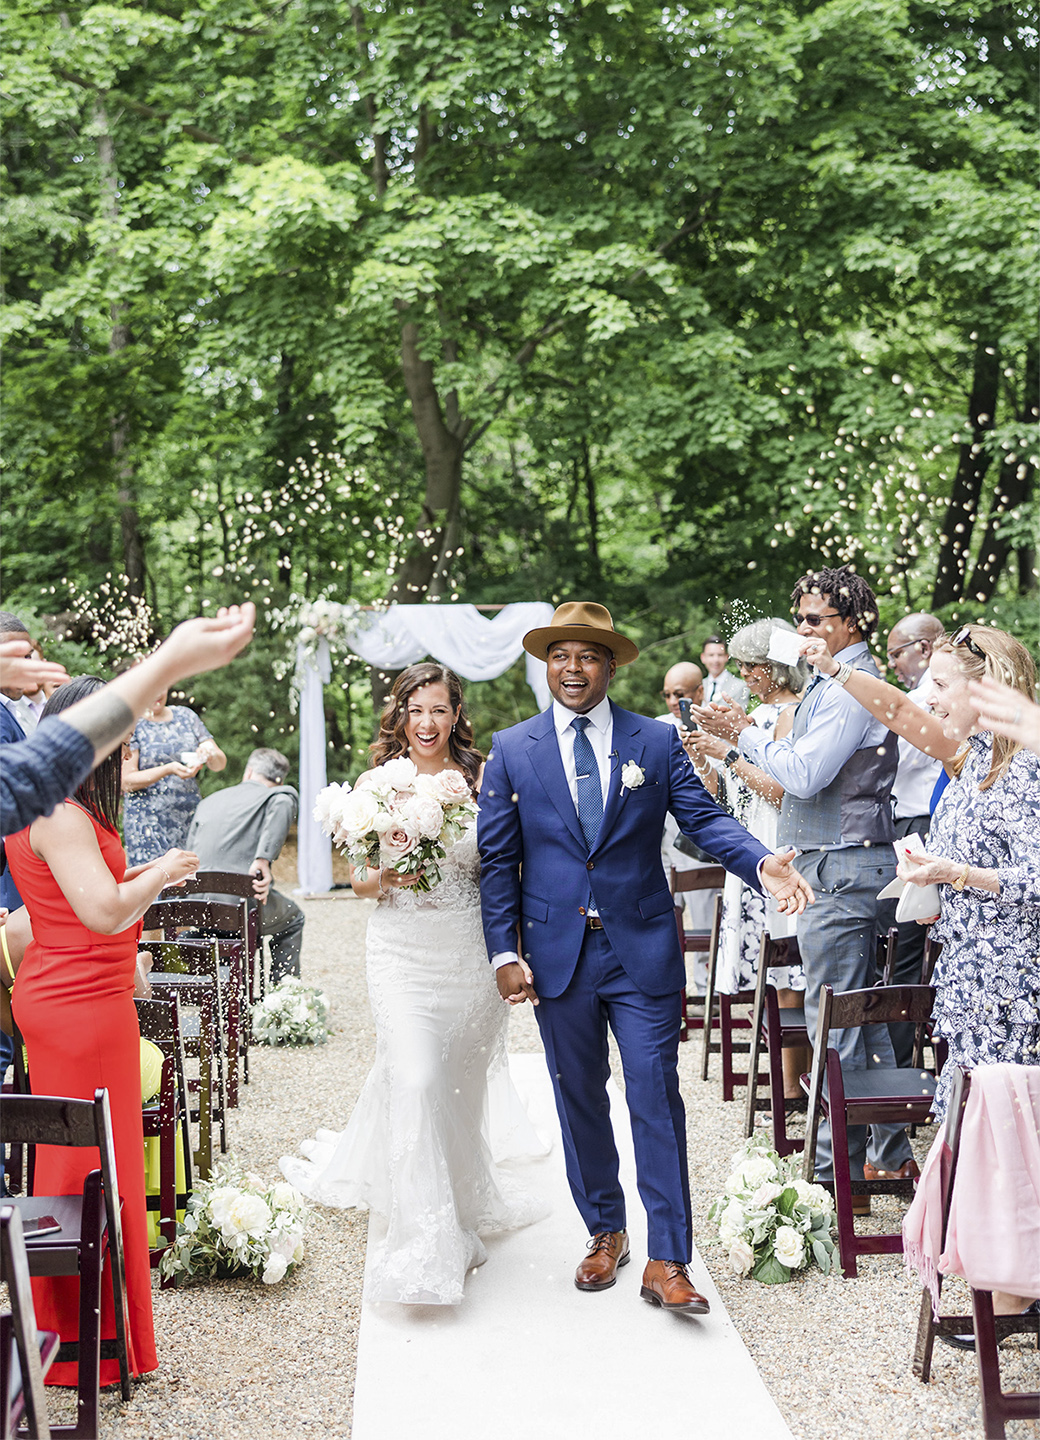 Married couple walking down the isle in outdoor wooded ceremony.